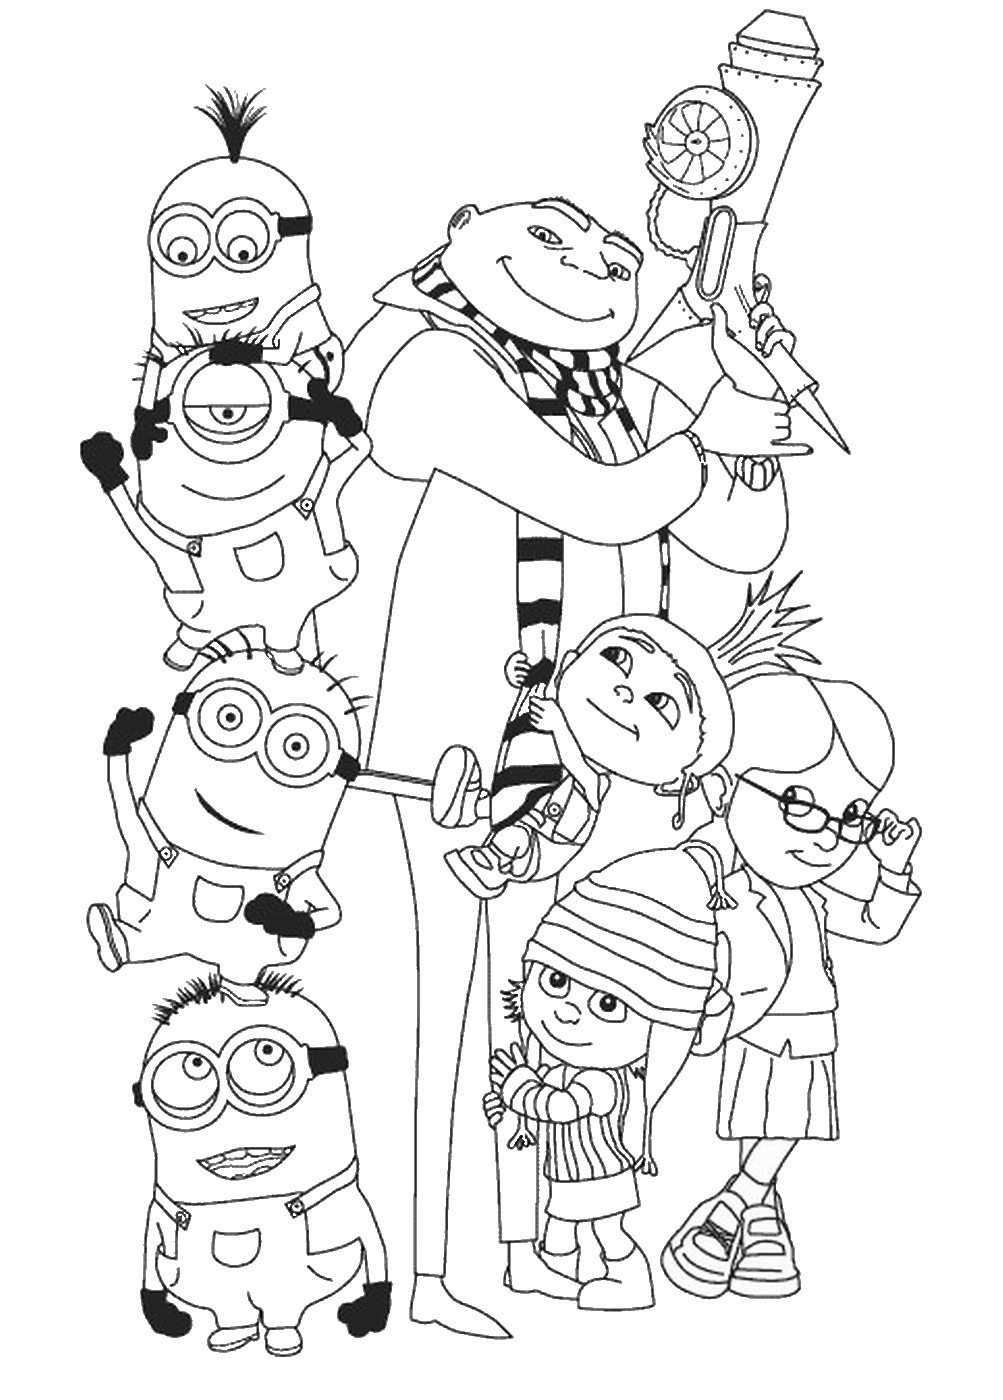 despicable me pictures to print despicable me 3 coloring pages pictures print despicable me to 